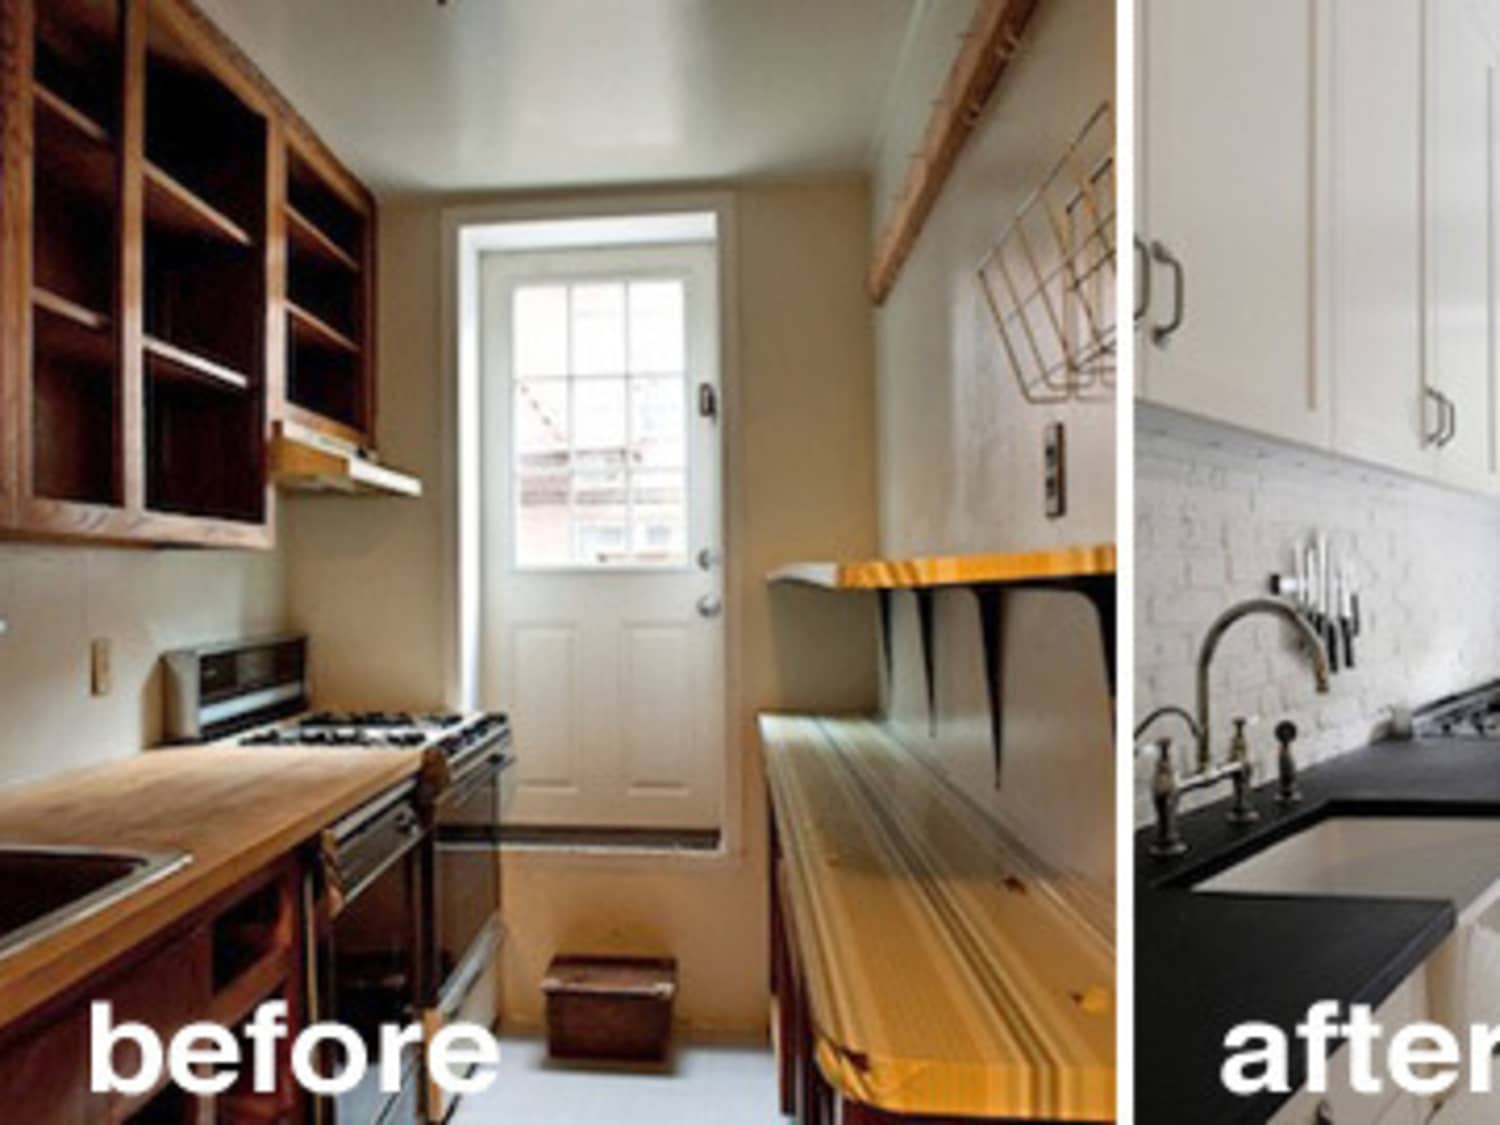 Before & After: 15 Creative Kitchen Renovations | Kitchn